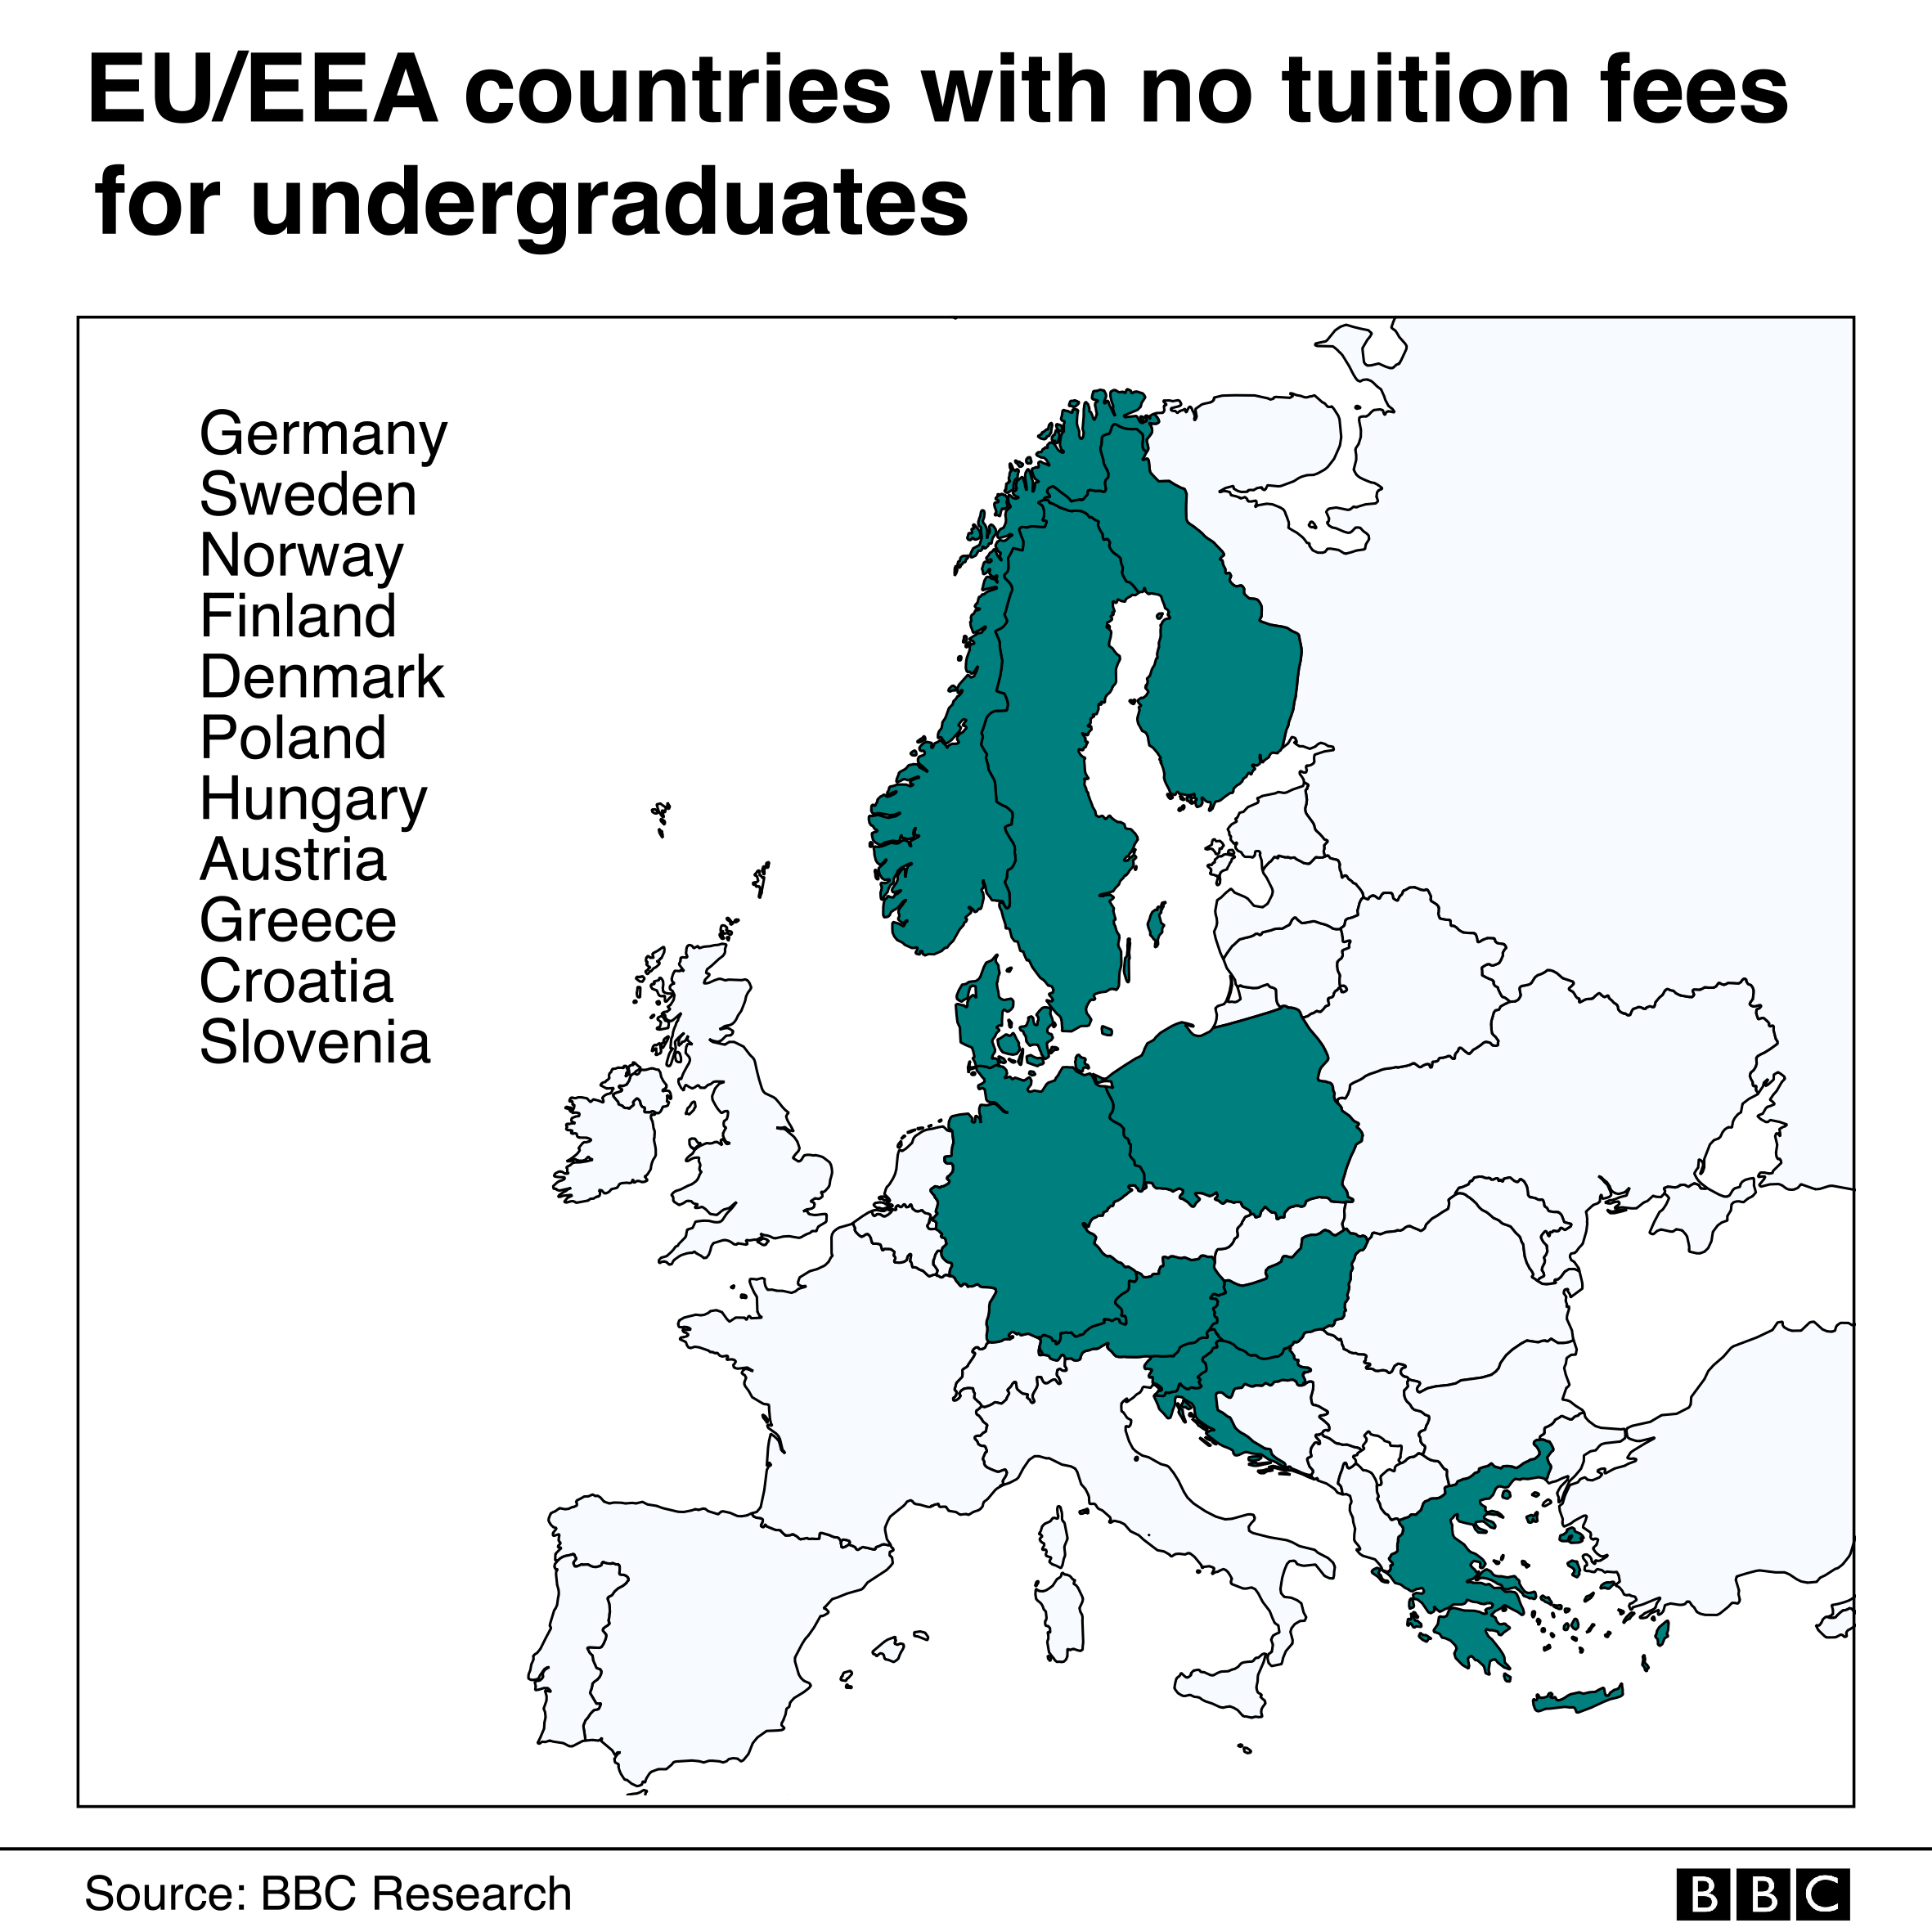 Is education free for foreigners in UK?